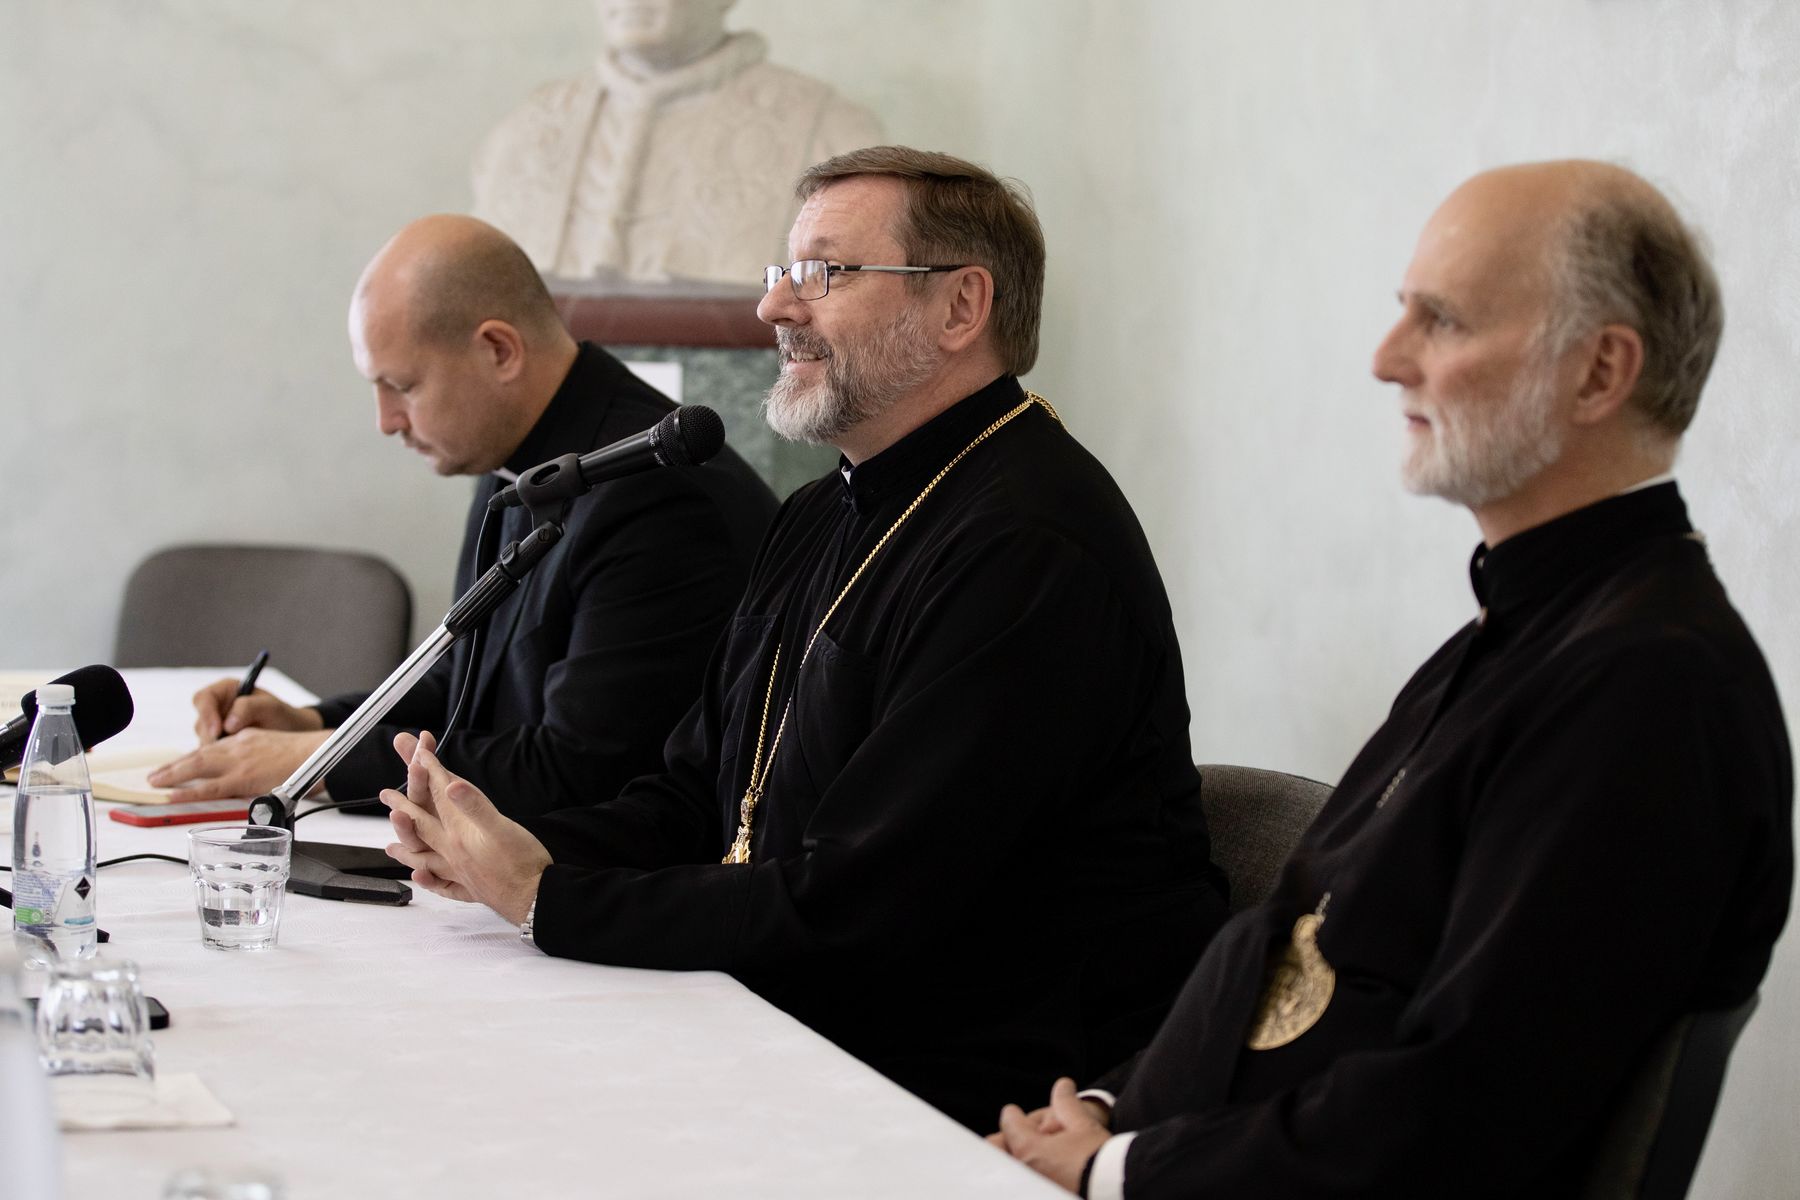 UGCC Synod Results Announced at Press Conference